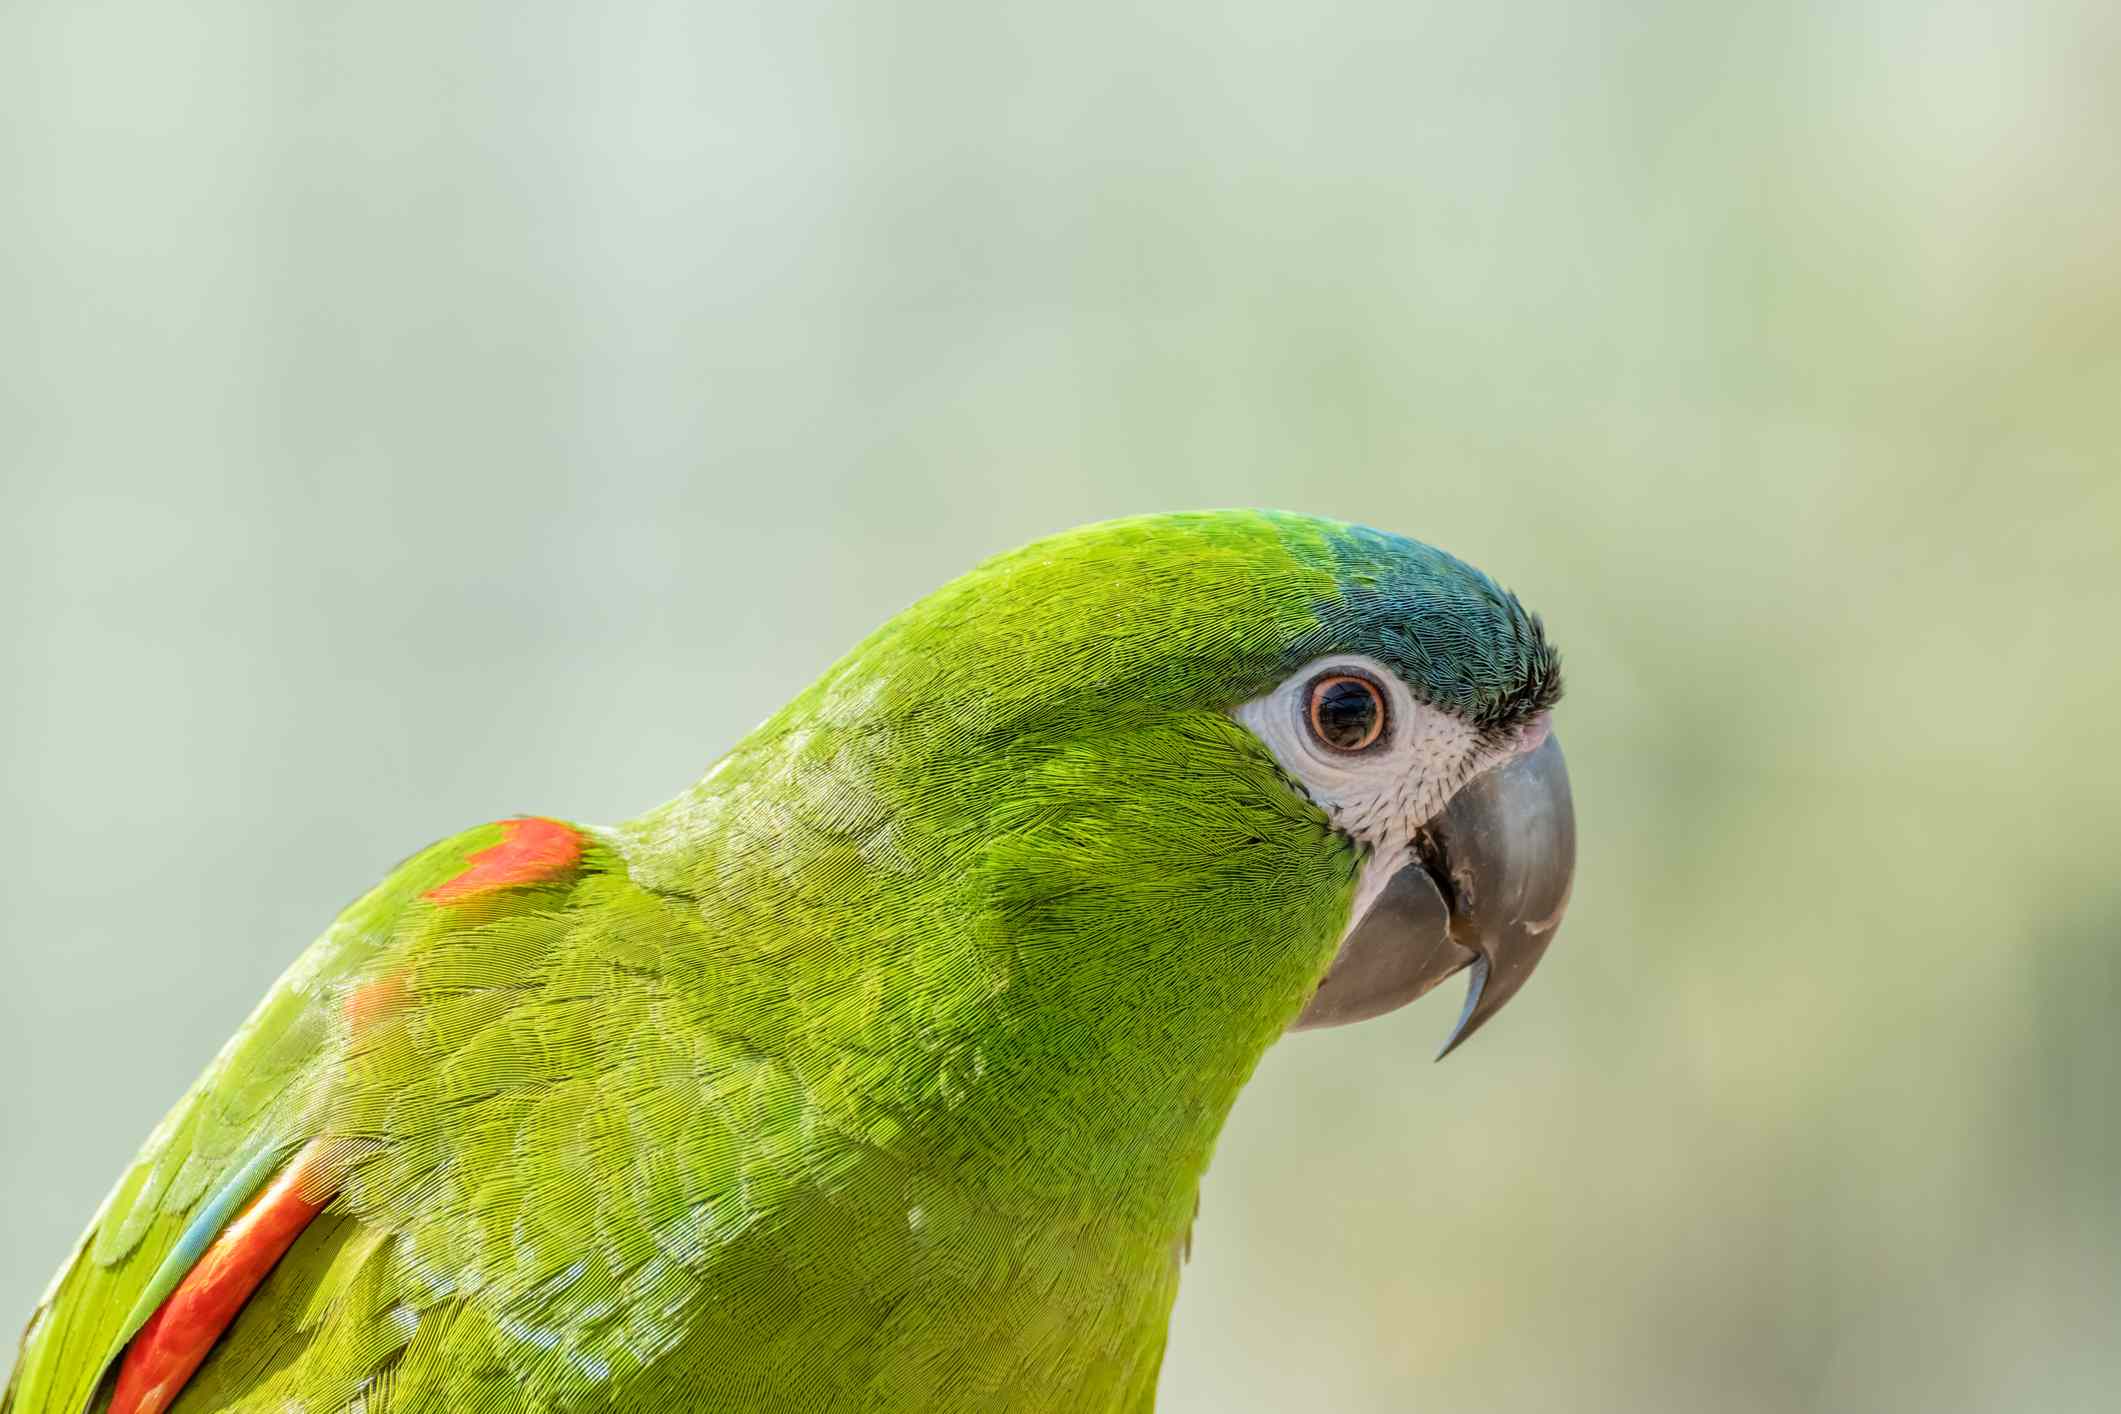 Close up photo of a Hahn's Macaw